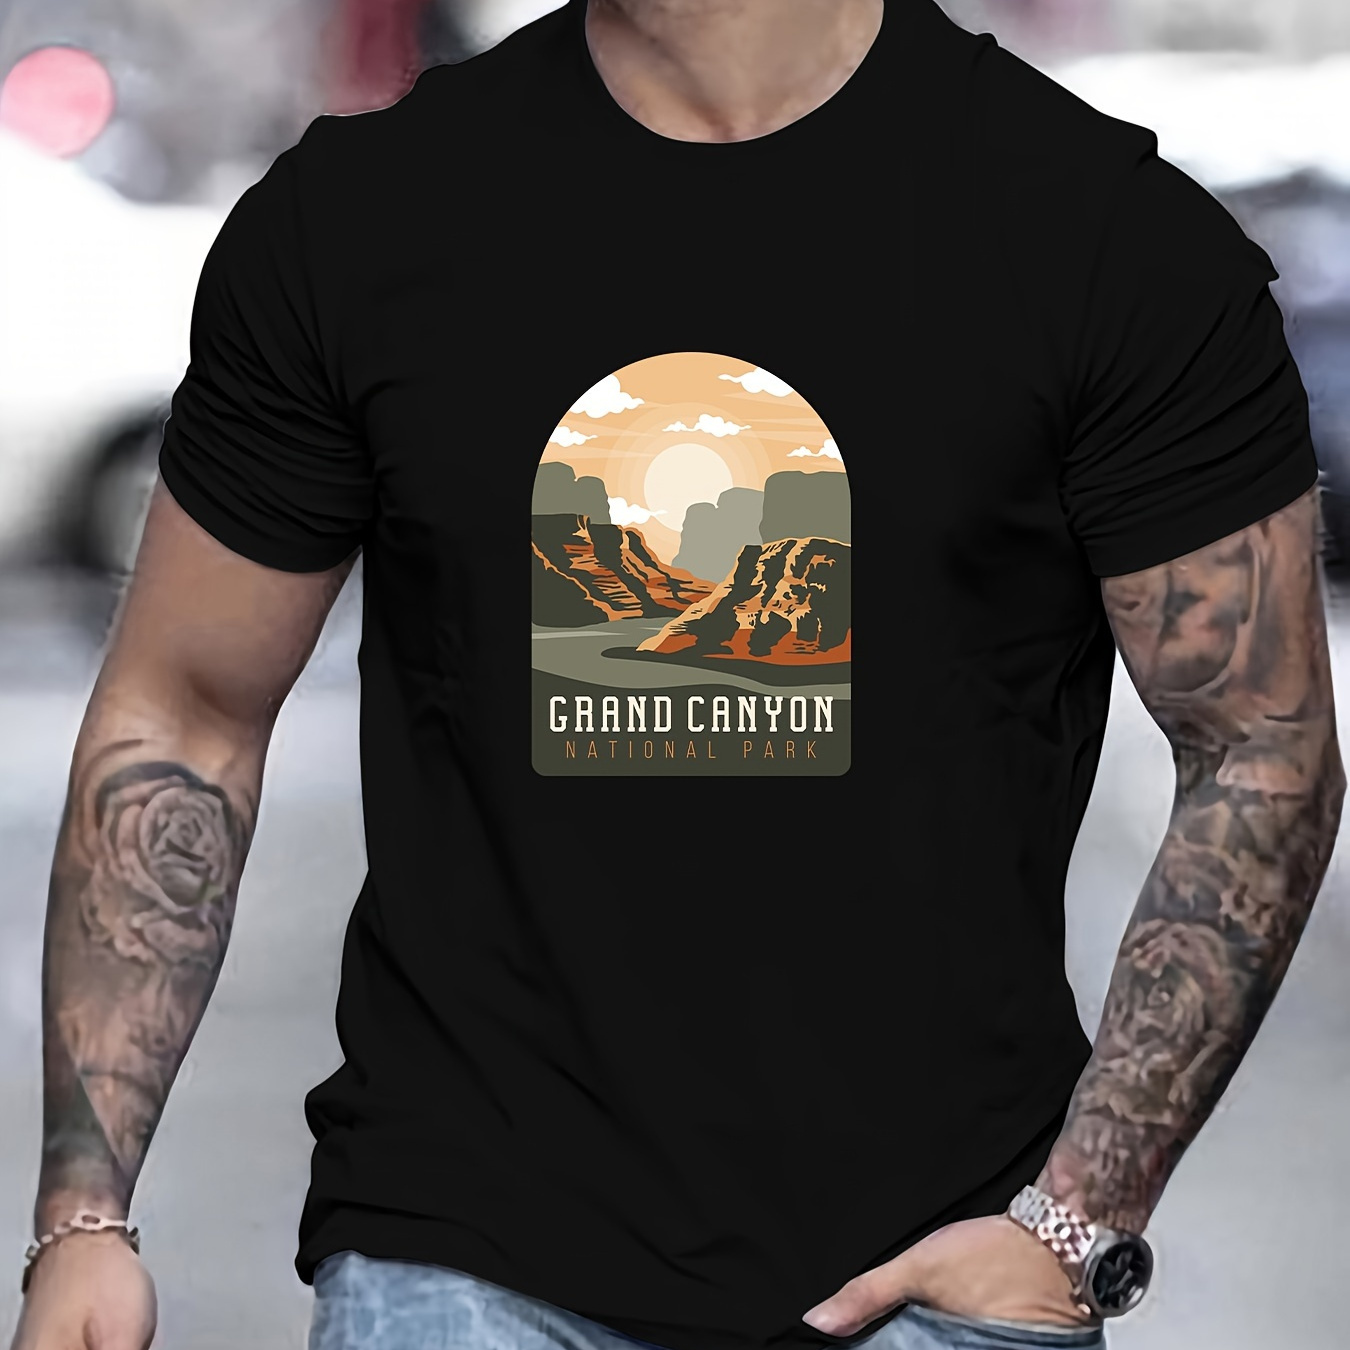 

Grand Canyon National Park Print T Shirt, Tees For Men, Casual Short Sleeve T-shirt For Summer